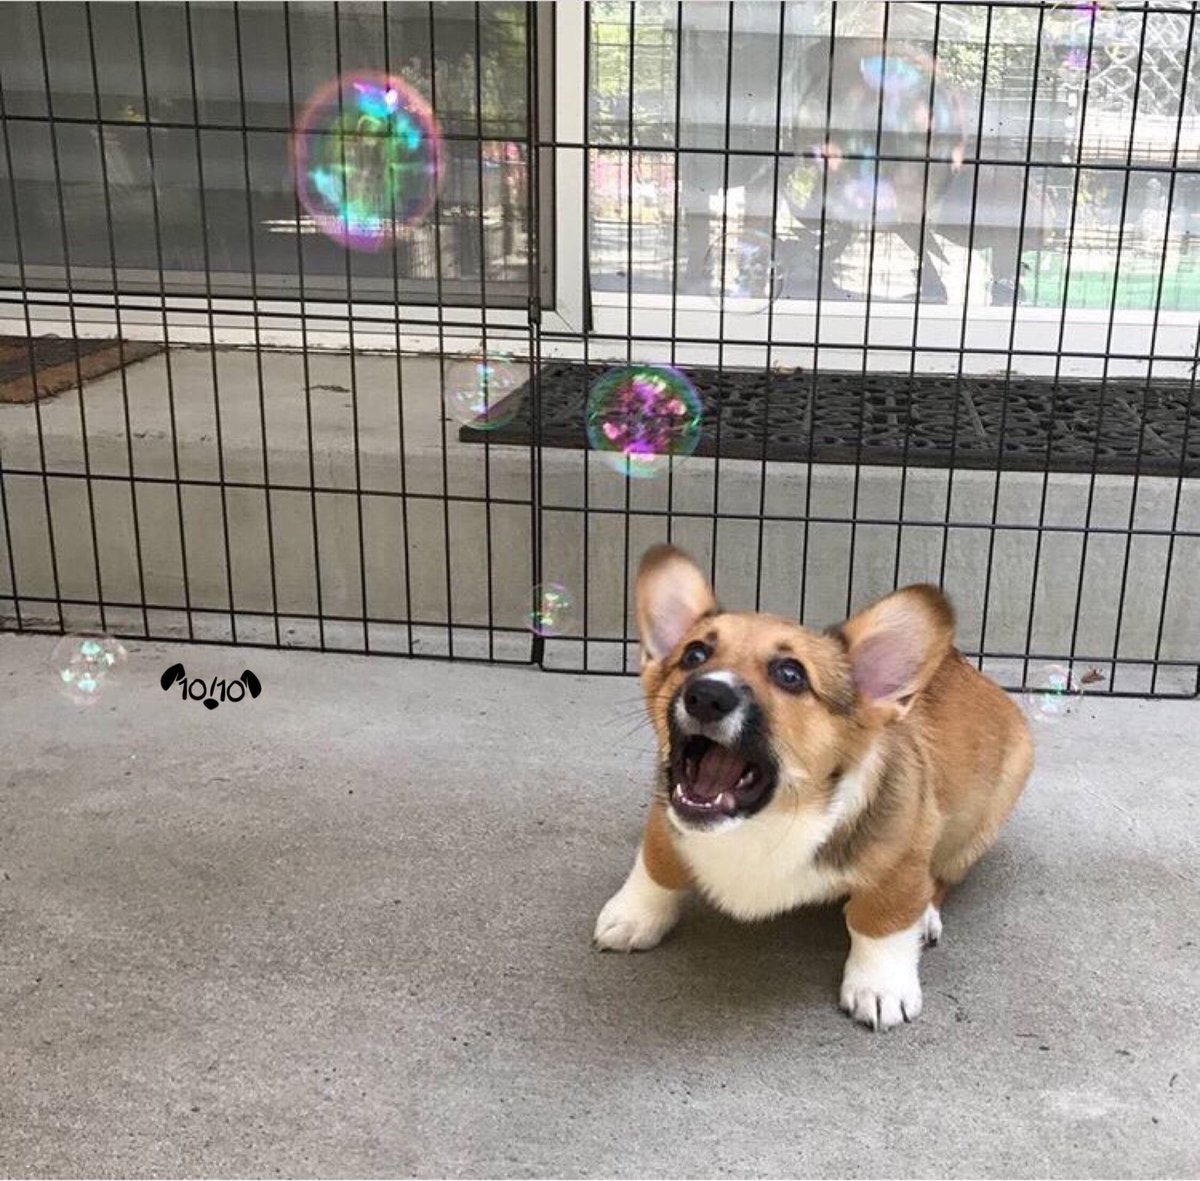 This is Hobbes. He's never seen bubbles before. 13/10 deep breaths buddy